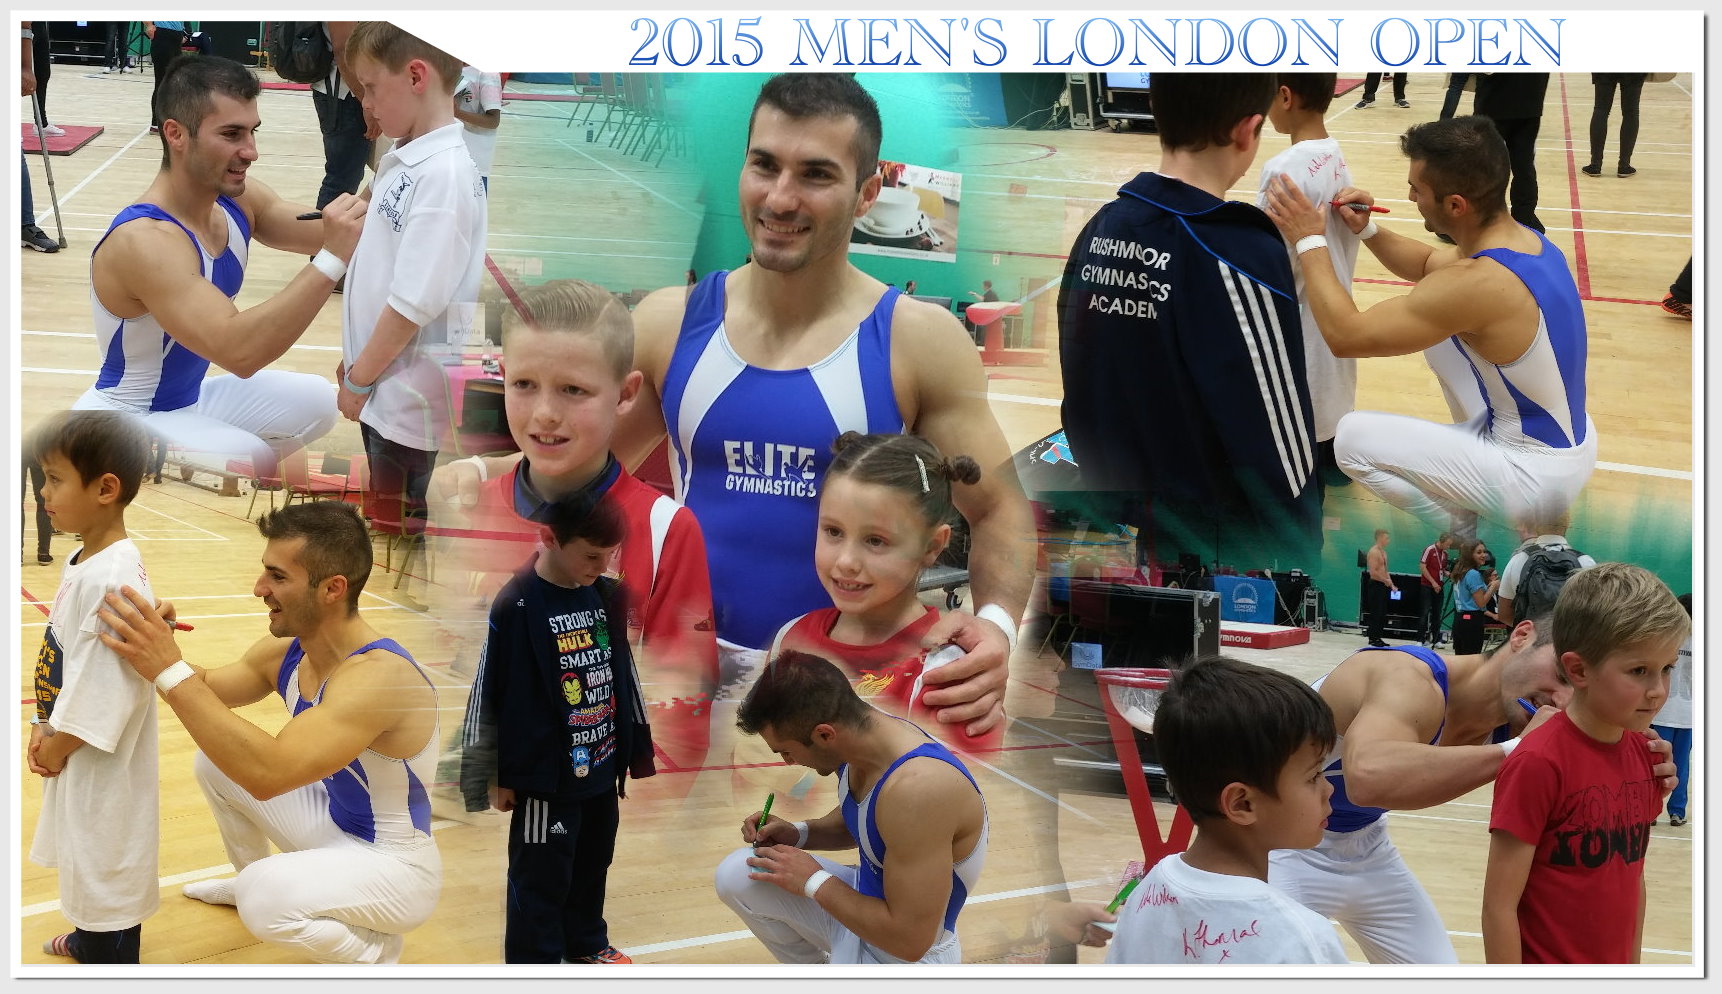 Stefan Kolimechkov meets young gymnasts and fans and signs autographs